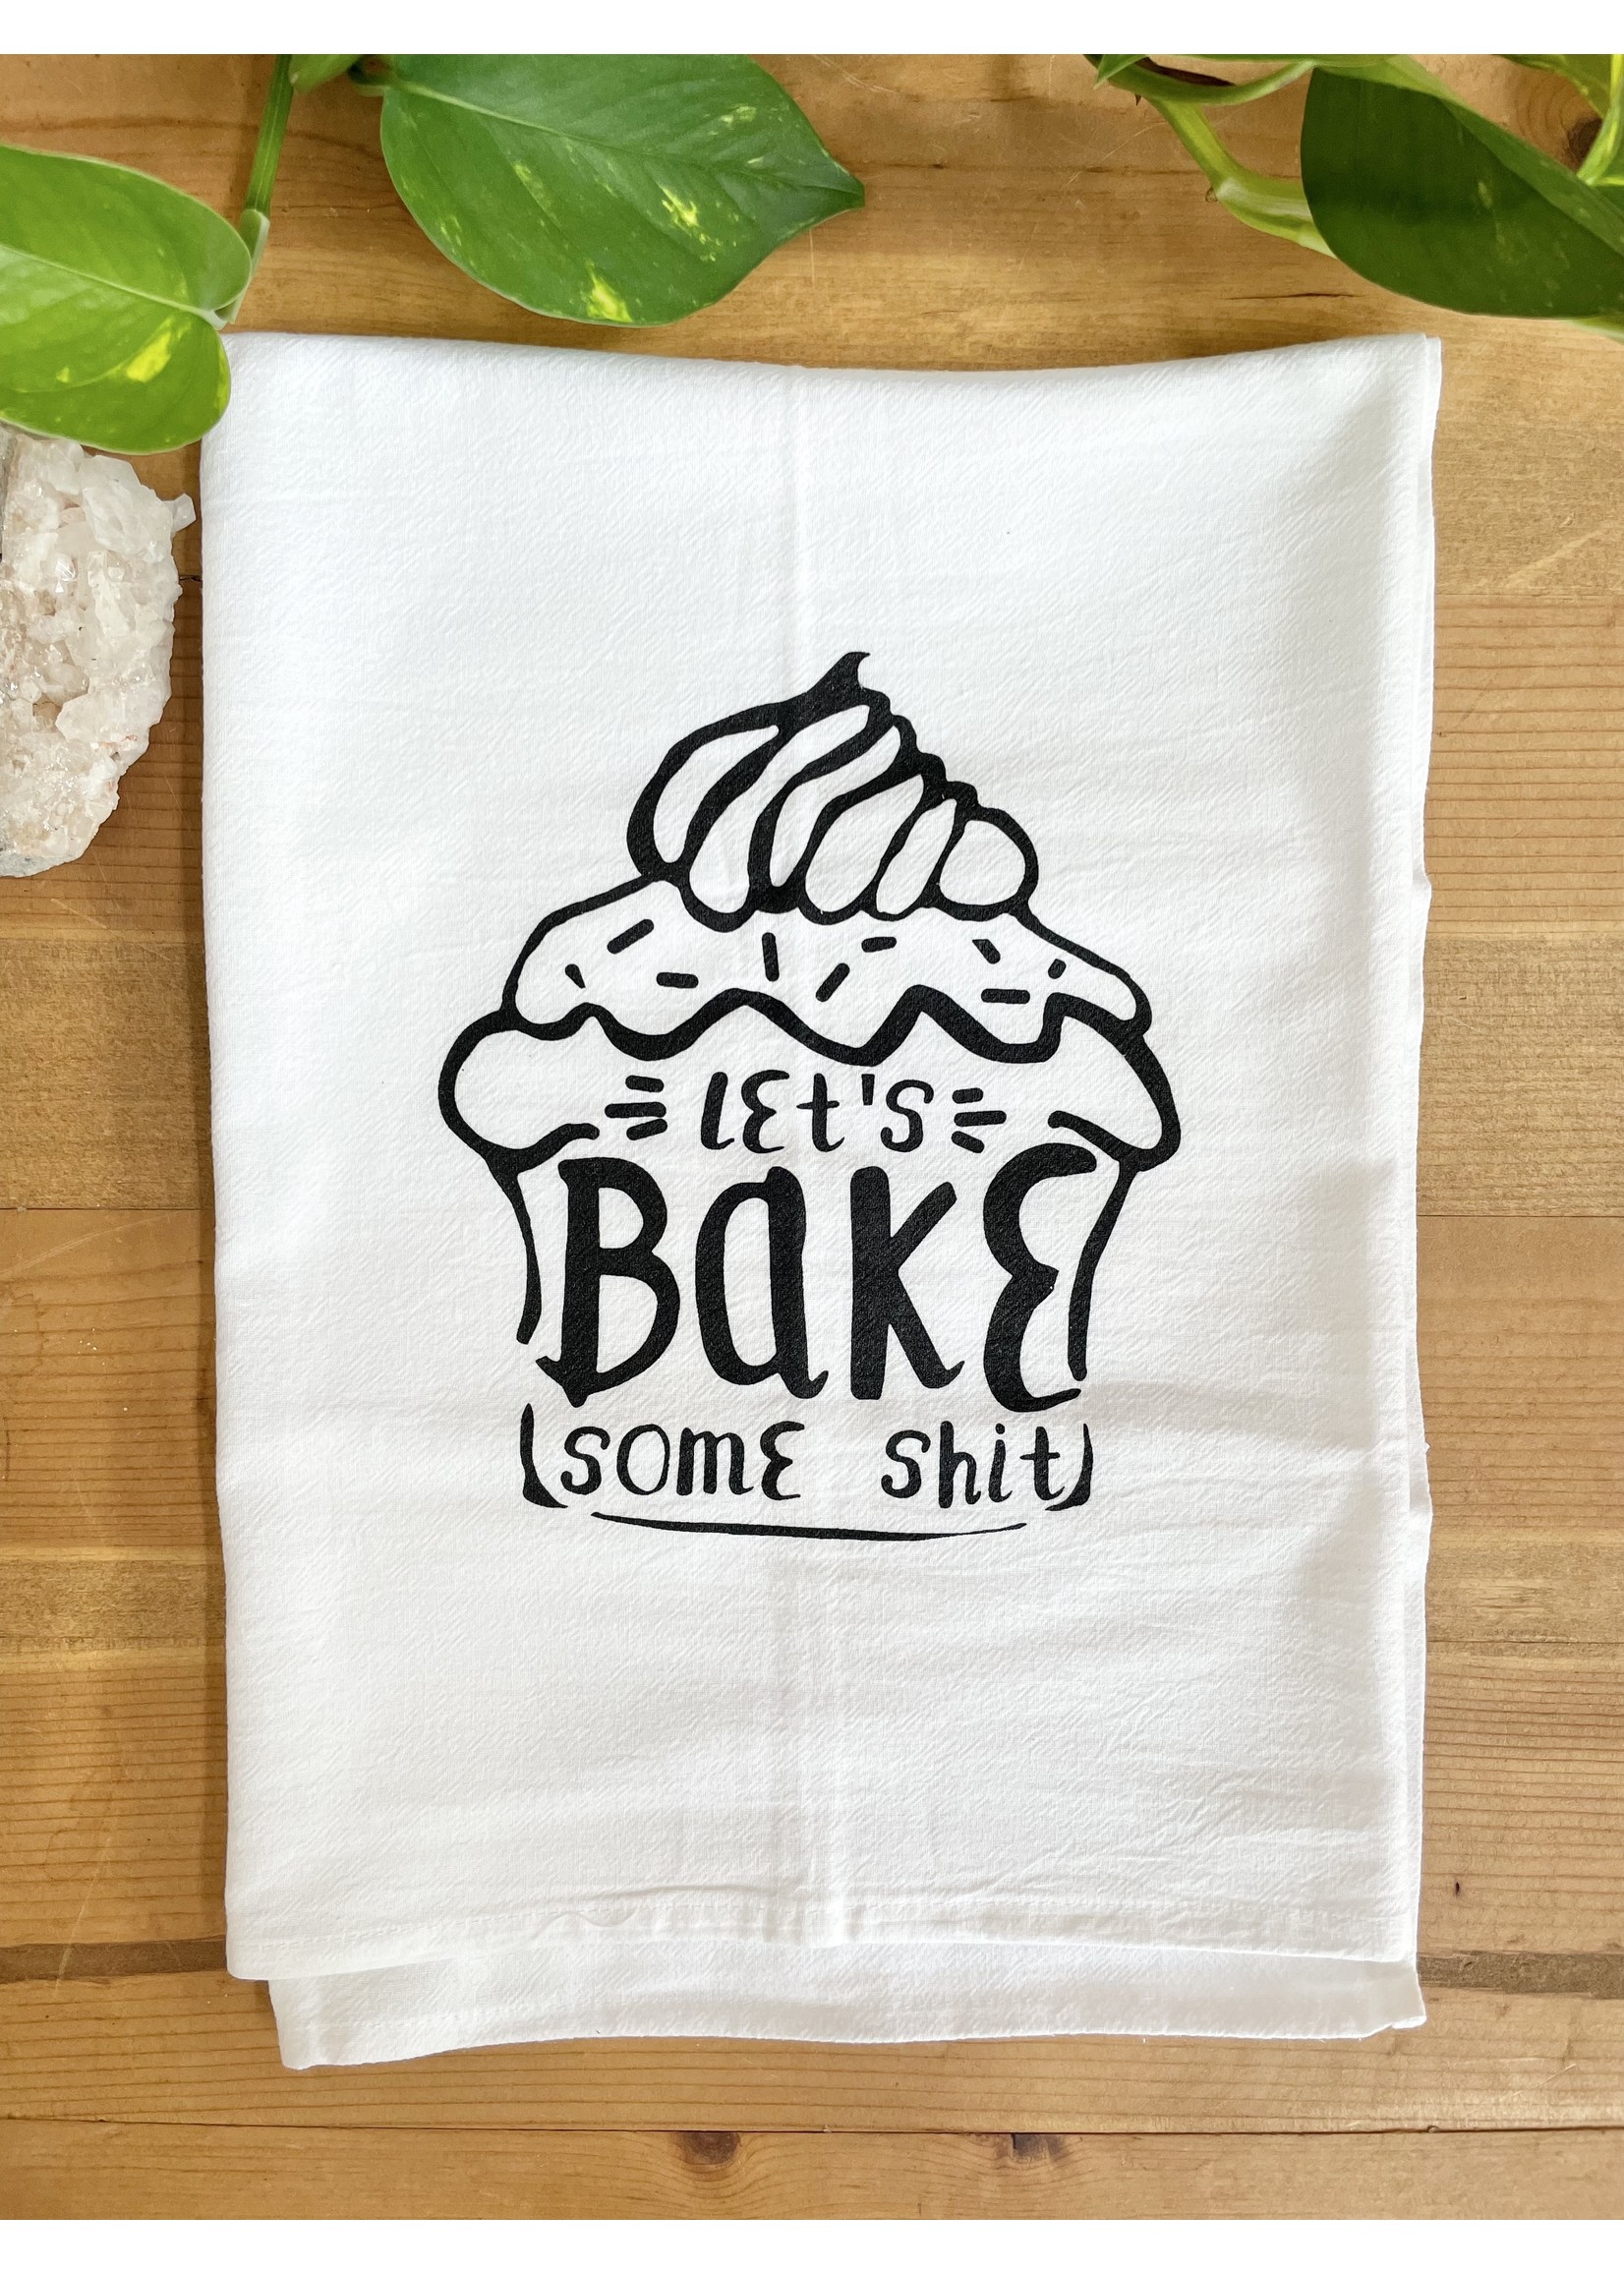 Tangled Up In Hue Wholesale Screen Printed Dish Towel Let's Bake Some Shit